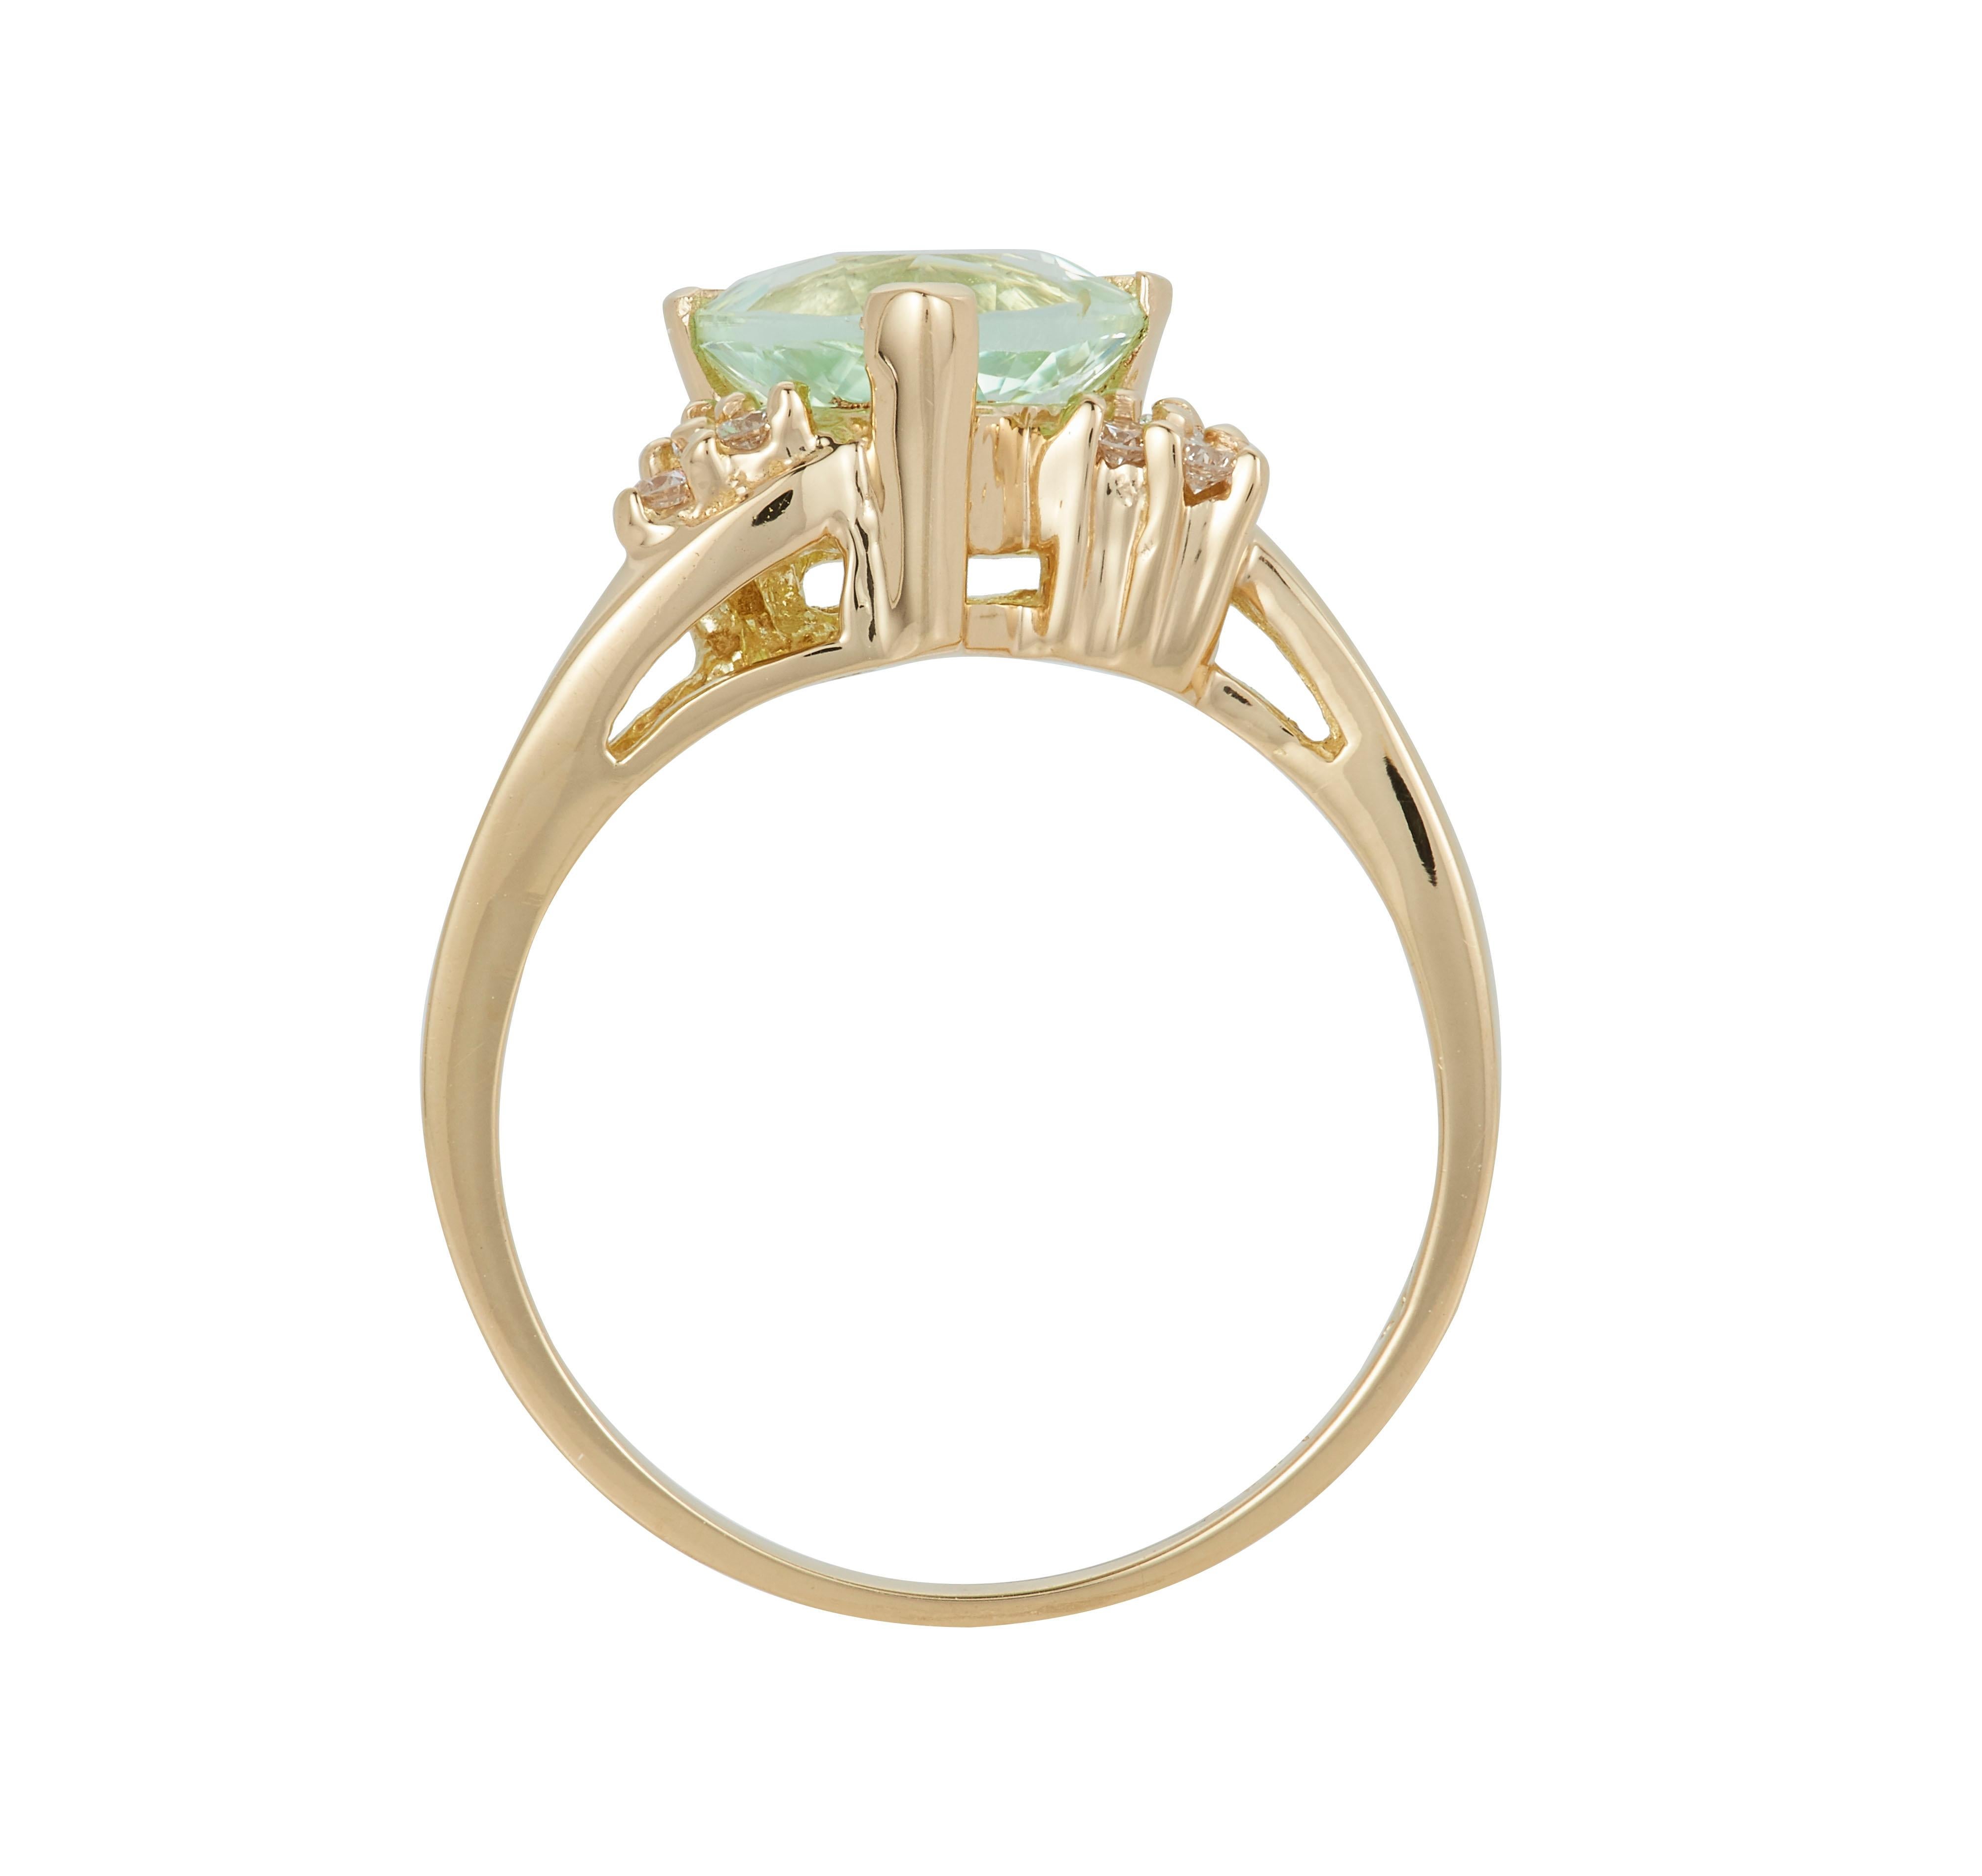 Metal: 18K Yellow Gold
Center Stone: 1 Trillion Shaped Paraiba Tourmaline at 1.32 Carats 
Side Stones: 6 Round Brilliant White Diamond 0.07 Carats Total Weight 
Clarity: SI / Color: H-I

Fine one-of-a-kind craftsmanship meets incredible quality in